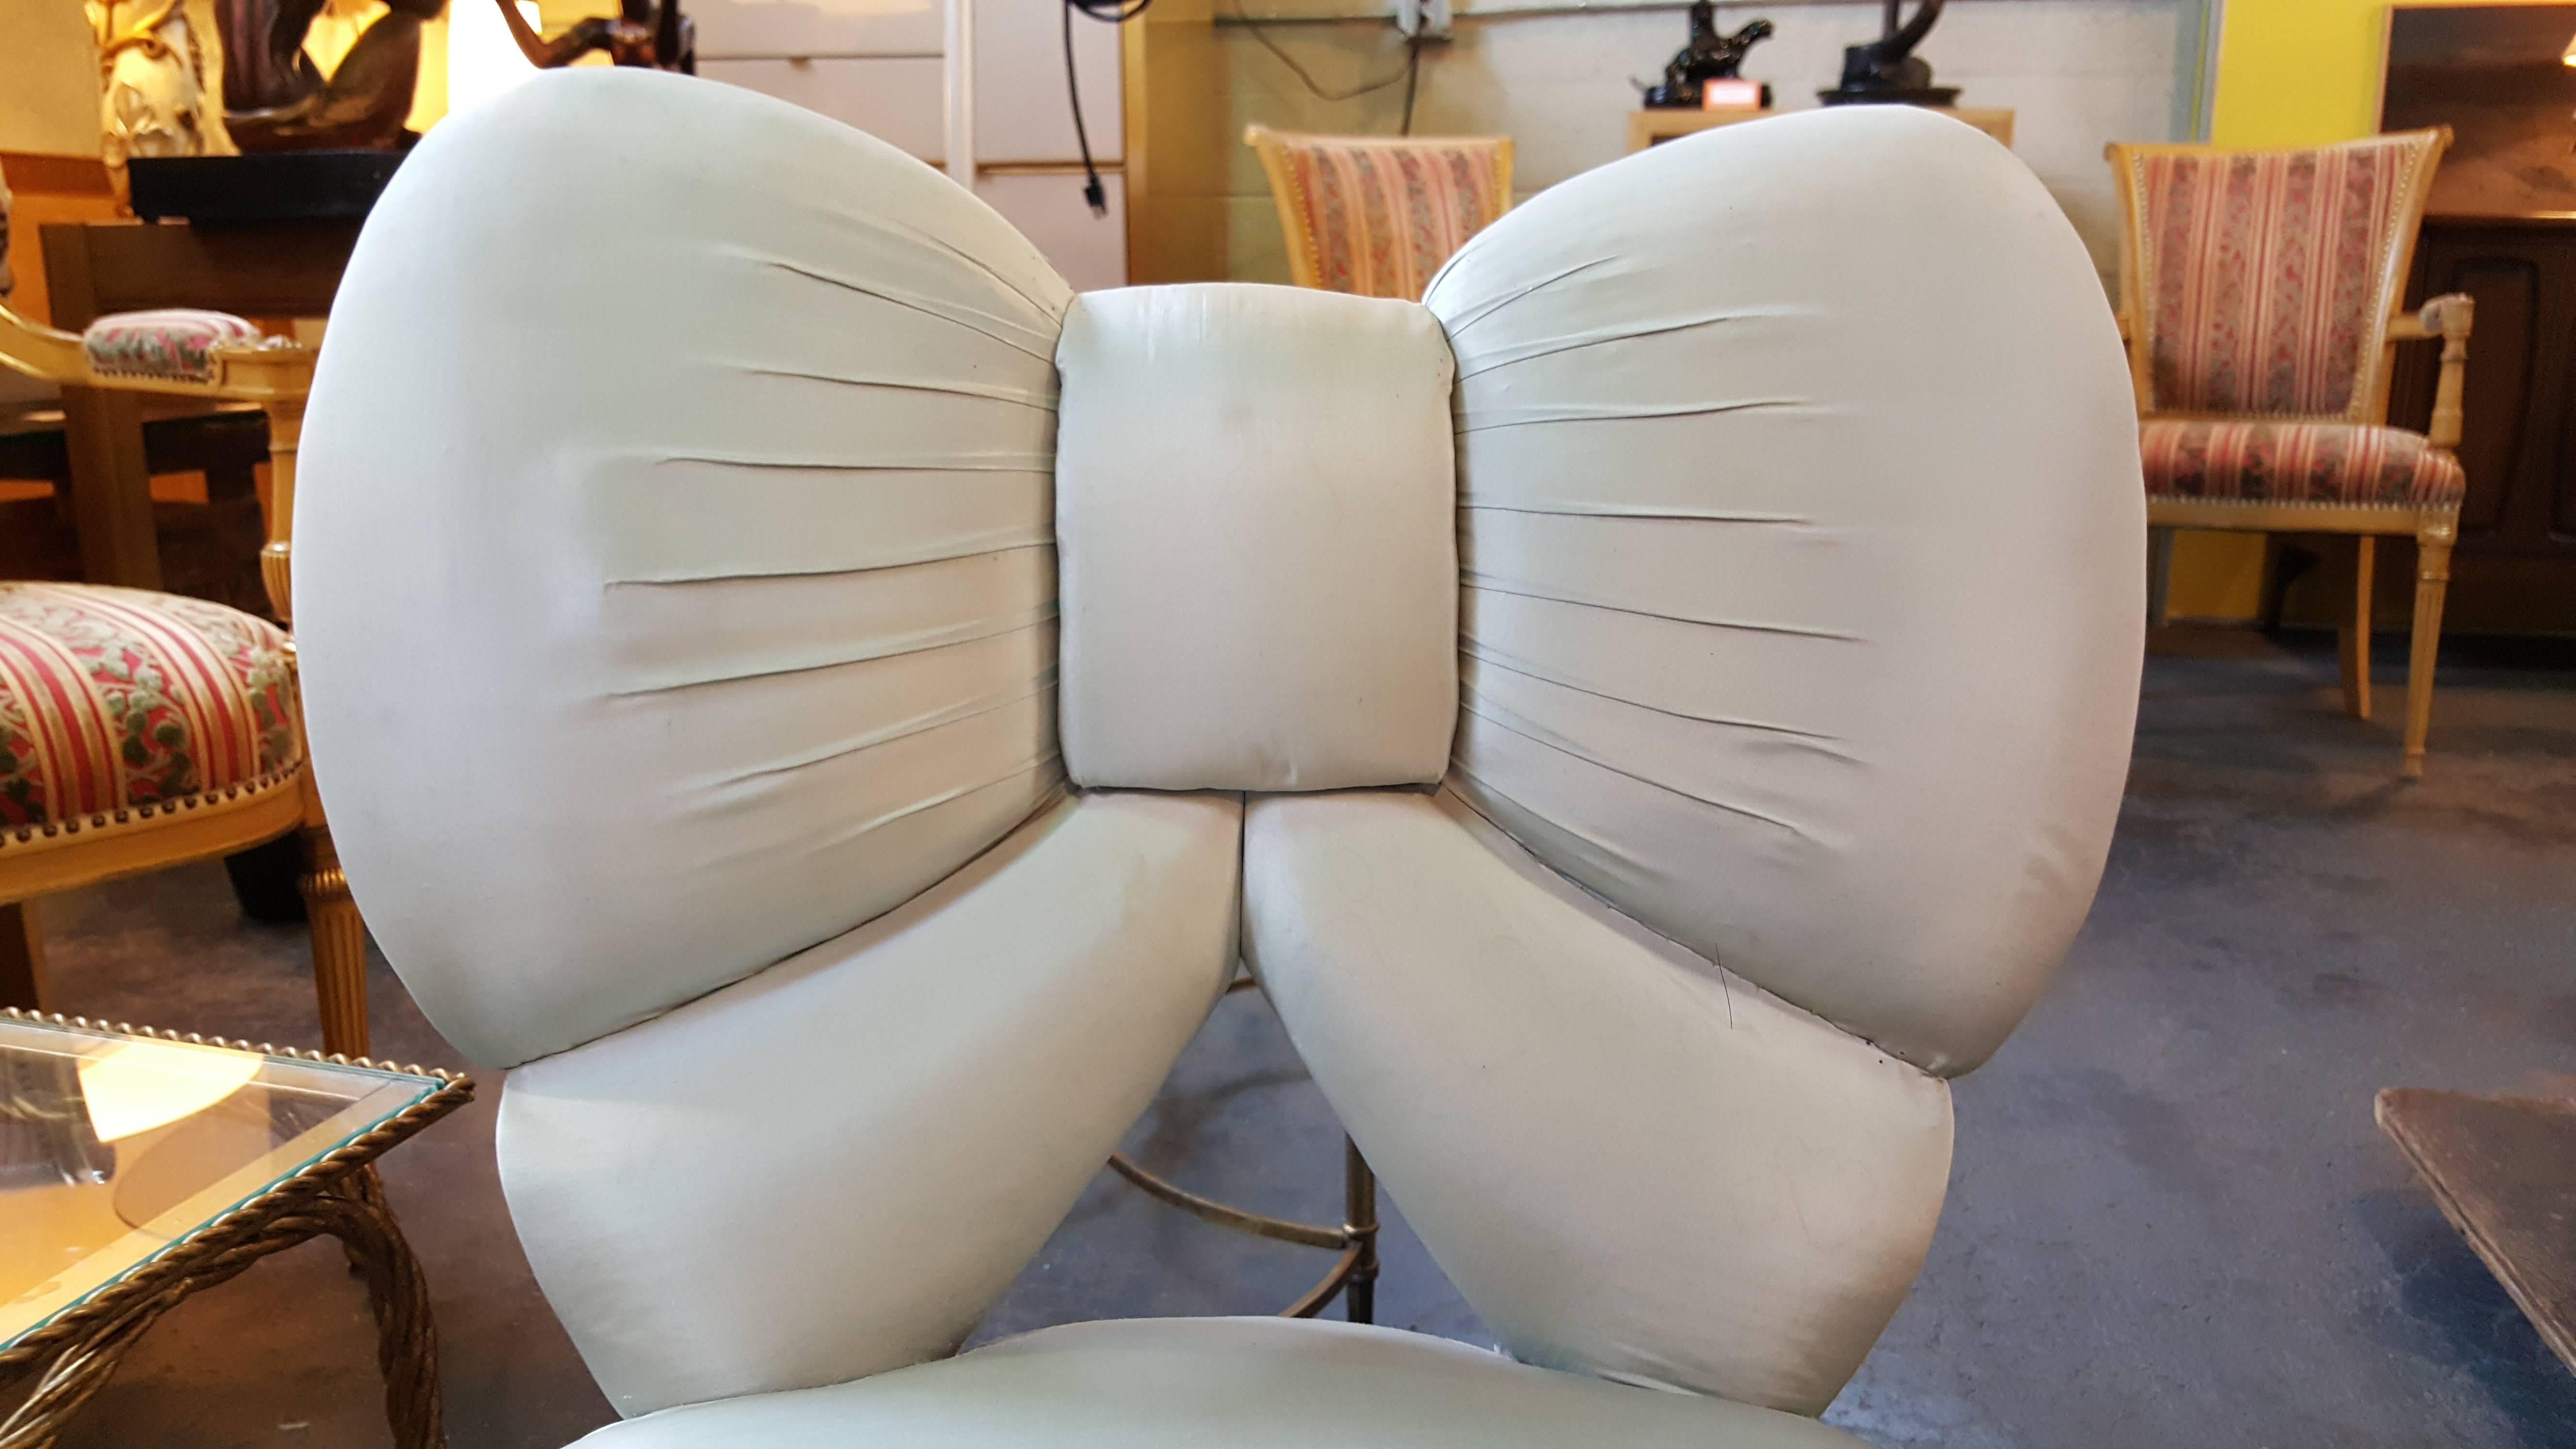 A unique 19th century American Victorian slipper chair with the form of a bow for the backrest. Great for use as a vanity chair, a desk chair or an accent chair. Lots of personality in this one. Option to re-upholster without dust ruffle, exposing